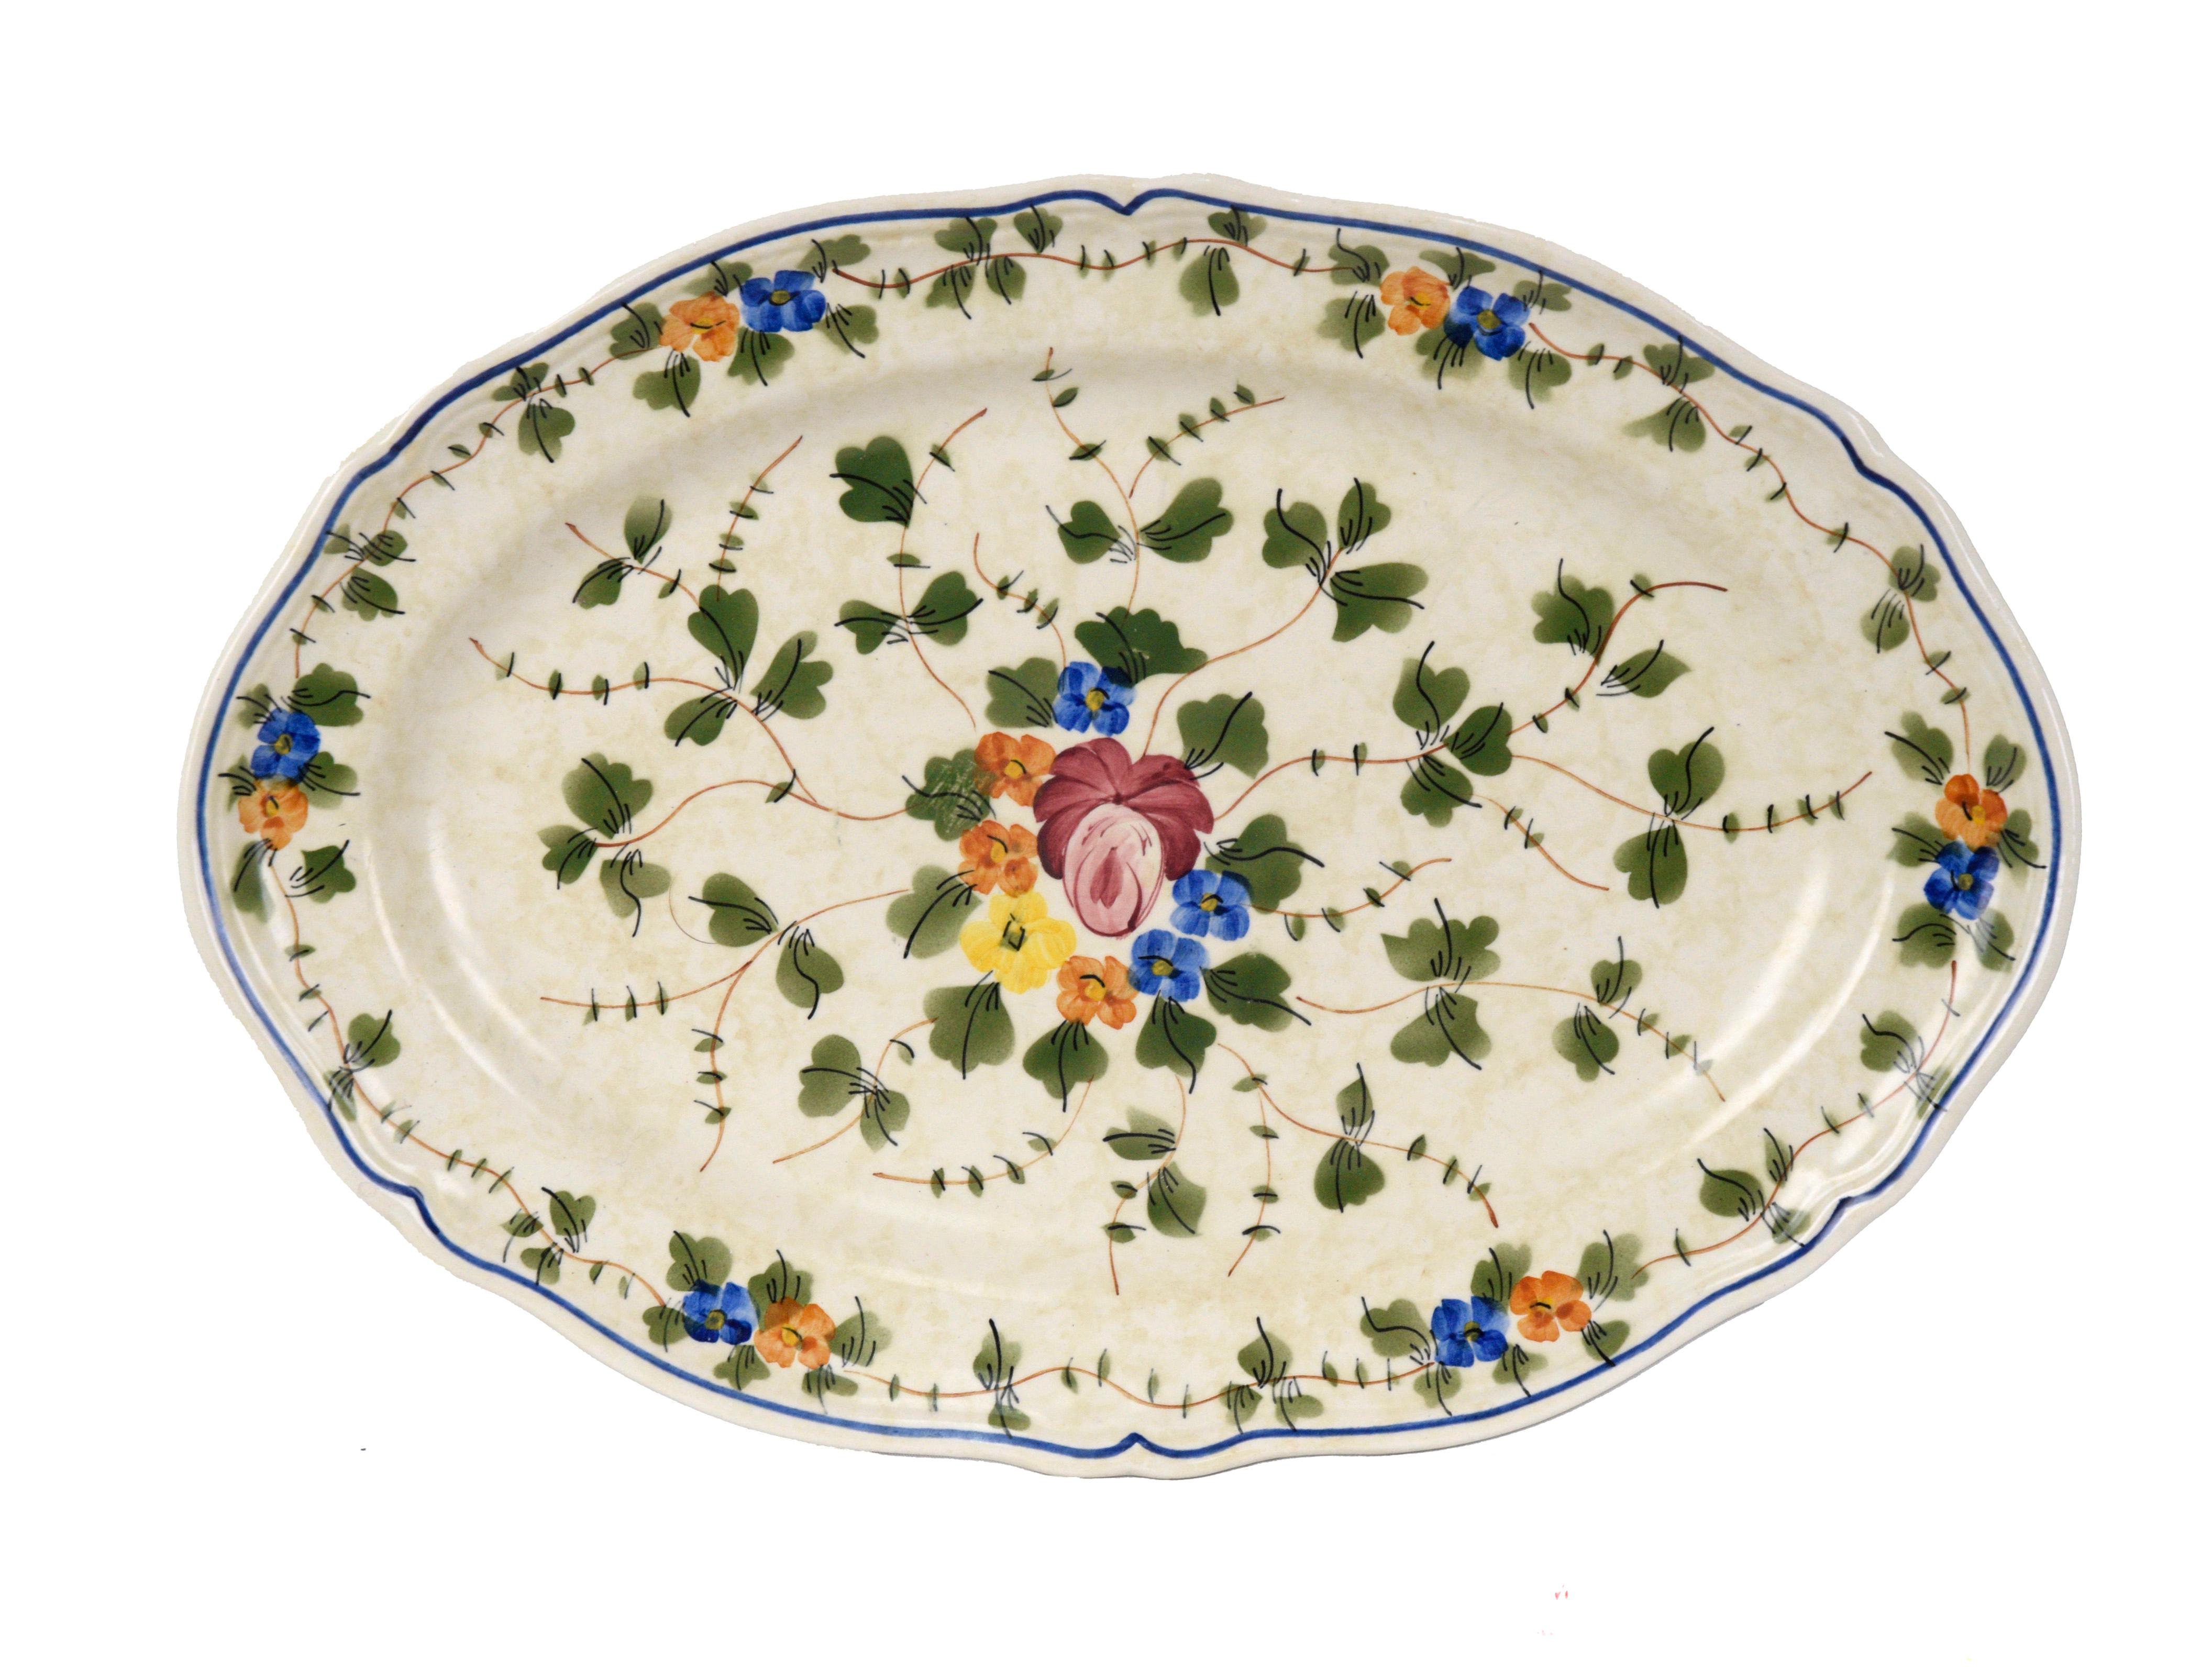 Vintage 4-Piece Longchamp Place Settings with Serving Tray, Set of 6, France

This beautifully hand-painted dish set is in good condition. The floral pattern features brightly colored violas encircled by green vines.

Set includes 6 of each, plus